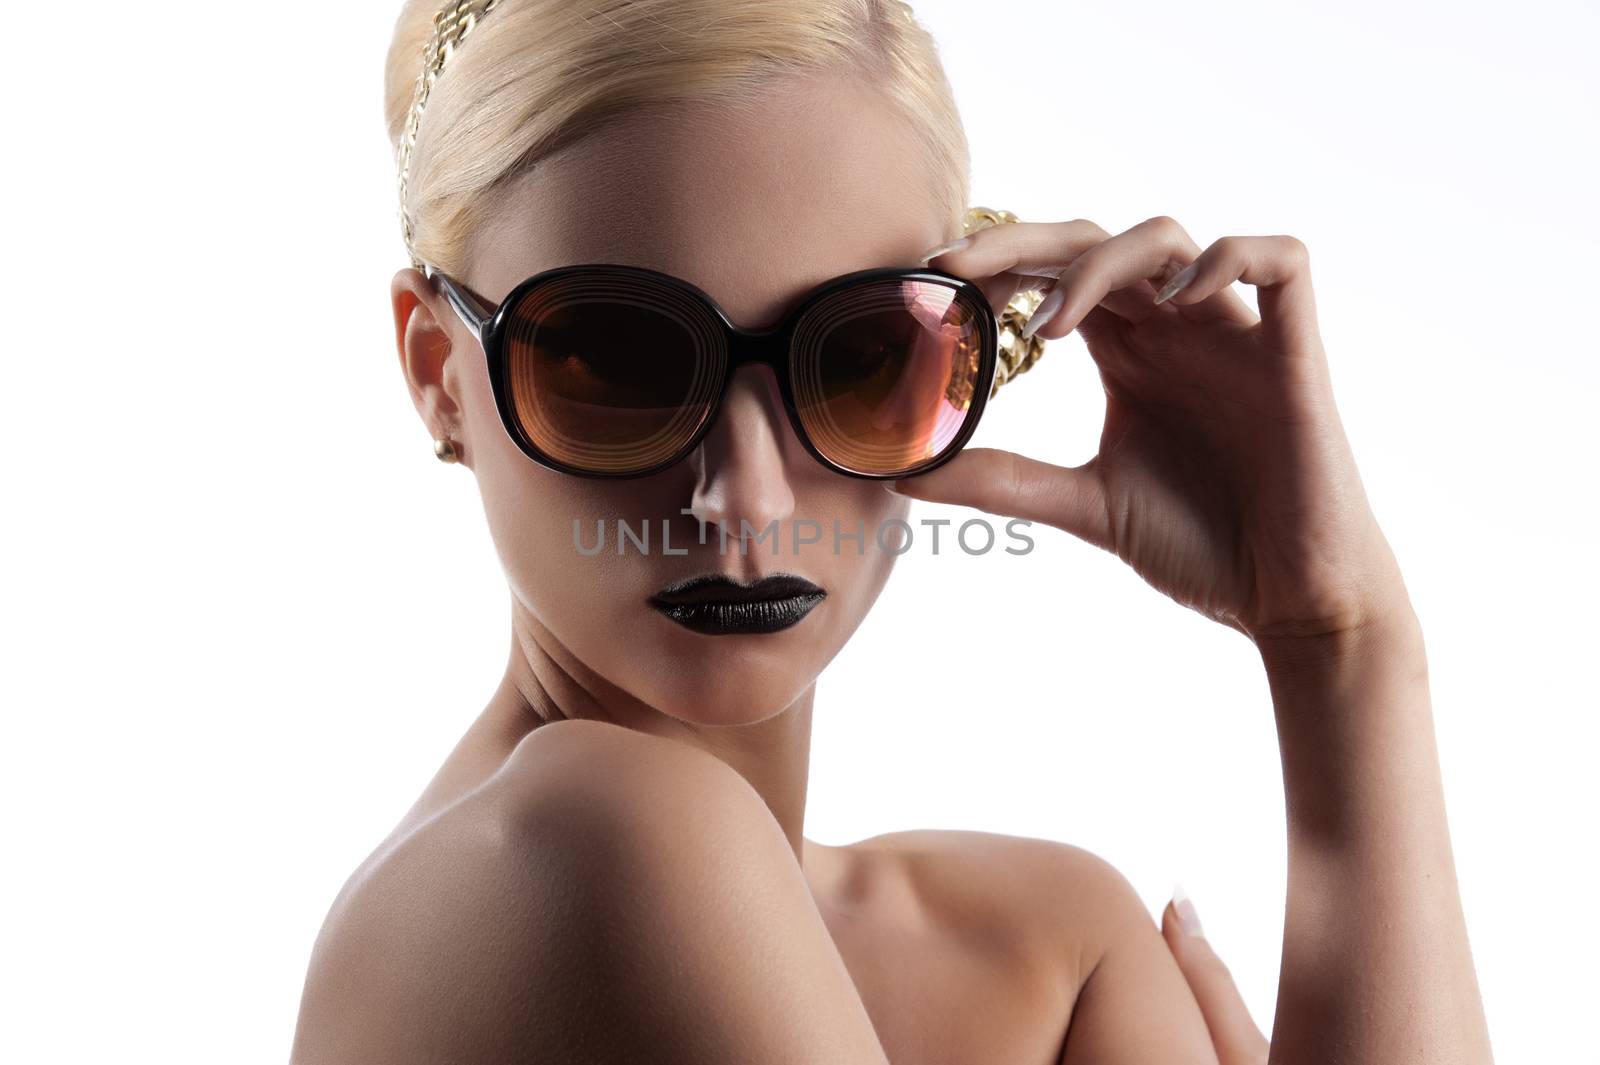 fashion portrait of young blond woman with hair style black lips and wearing gold sunglasses over white